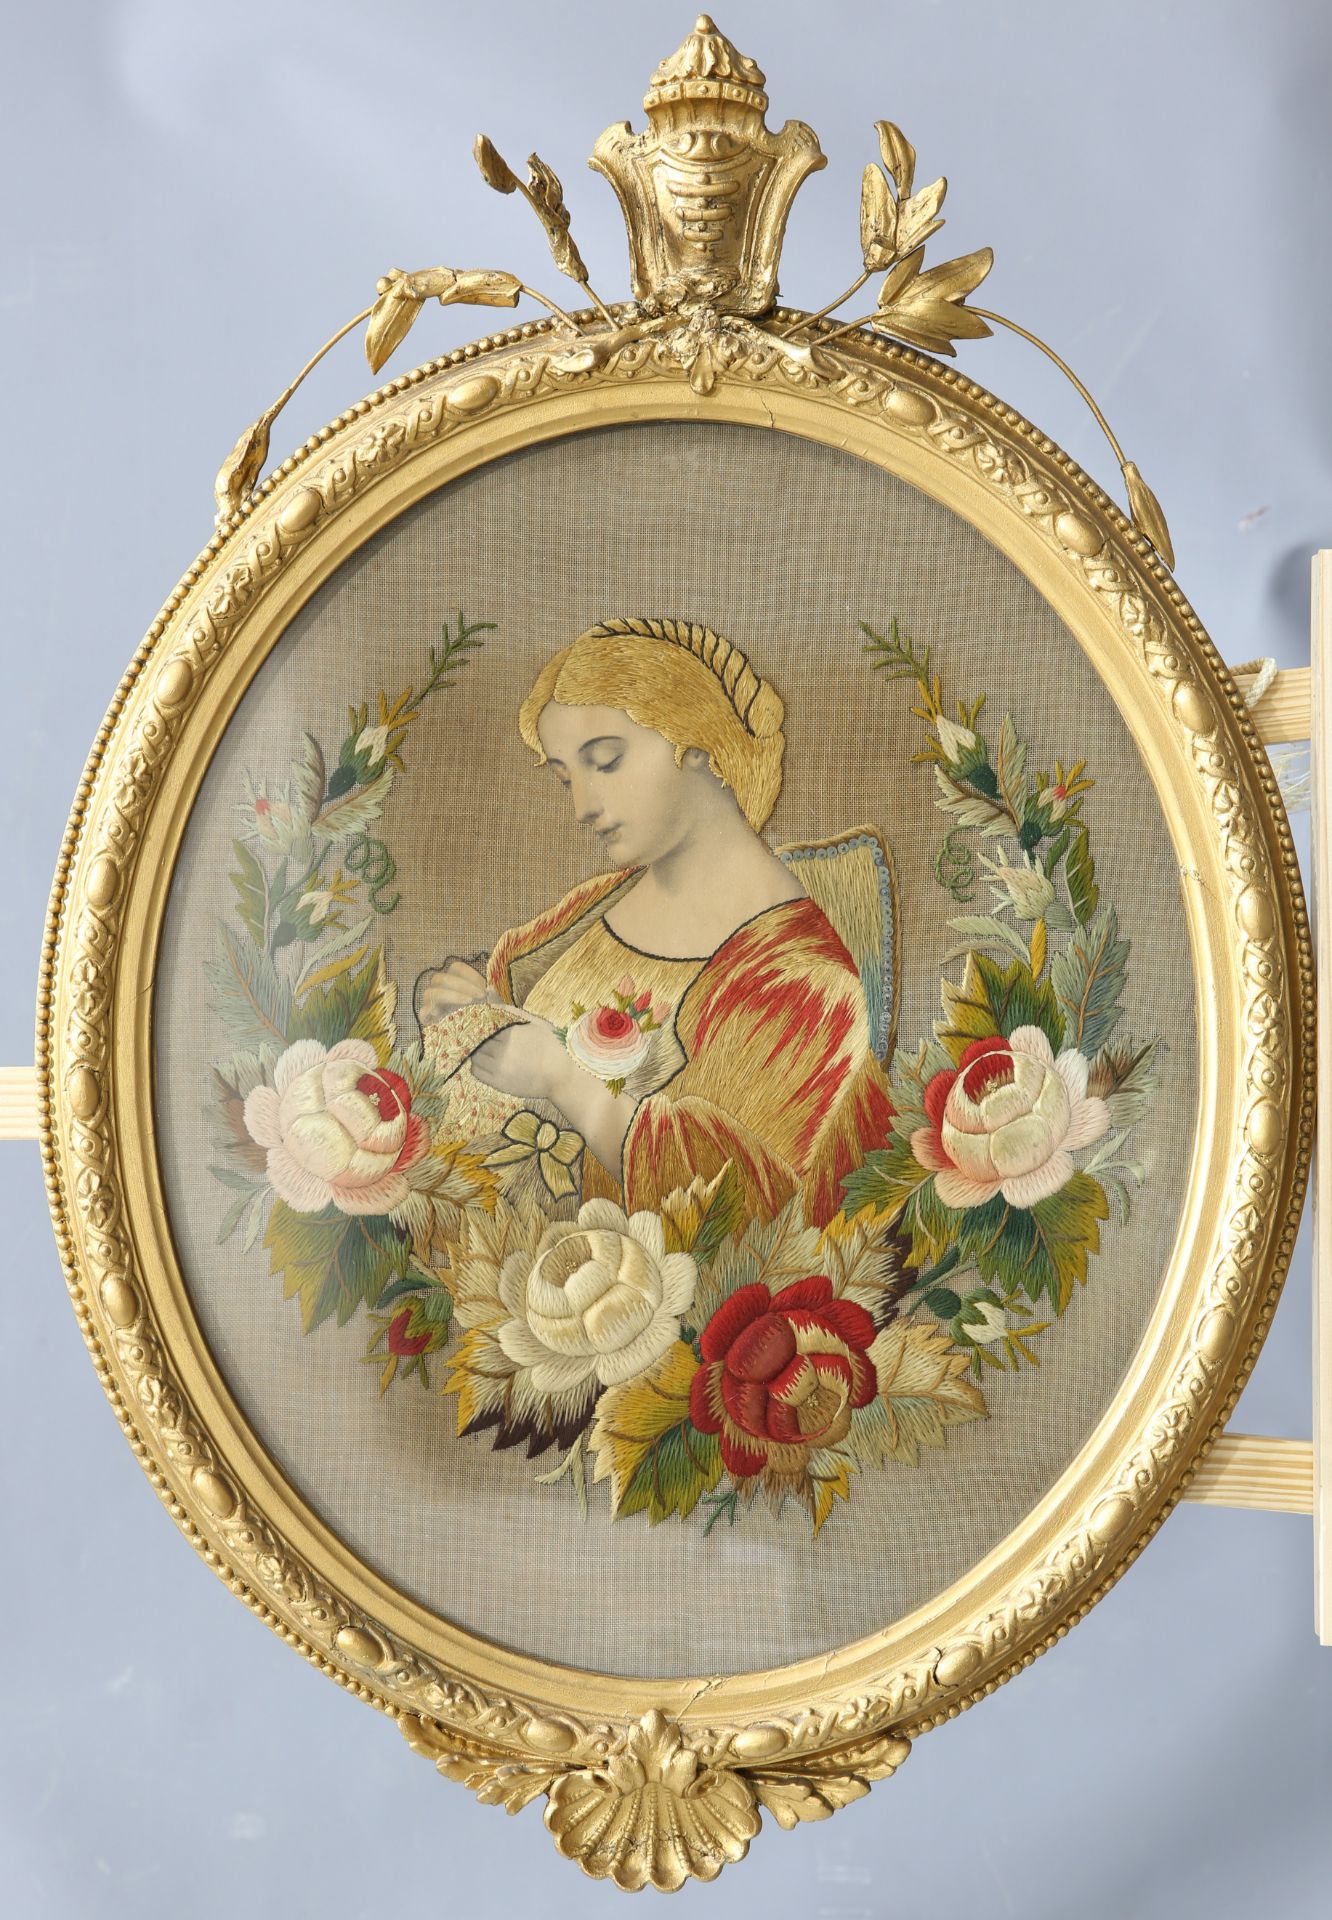 A 19TH CENTURY RAISED EMBROIDERY PICTURE - Image 2 of 2